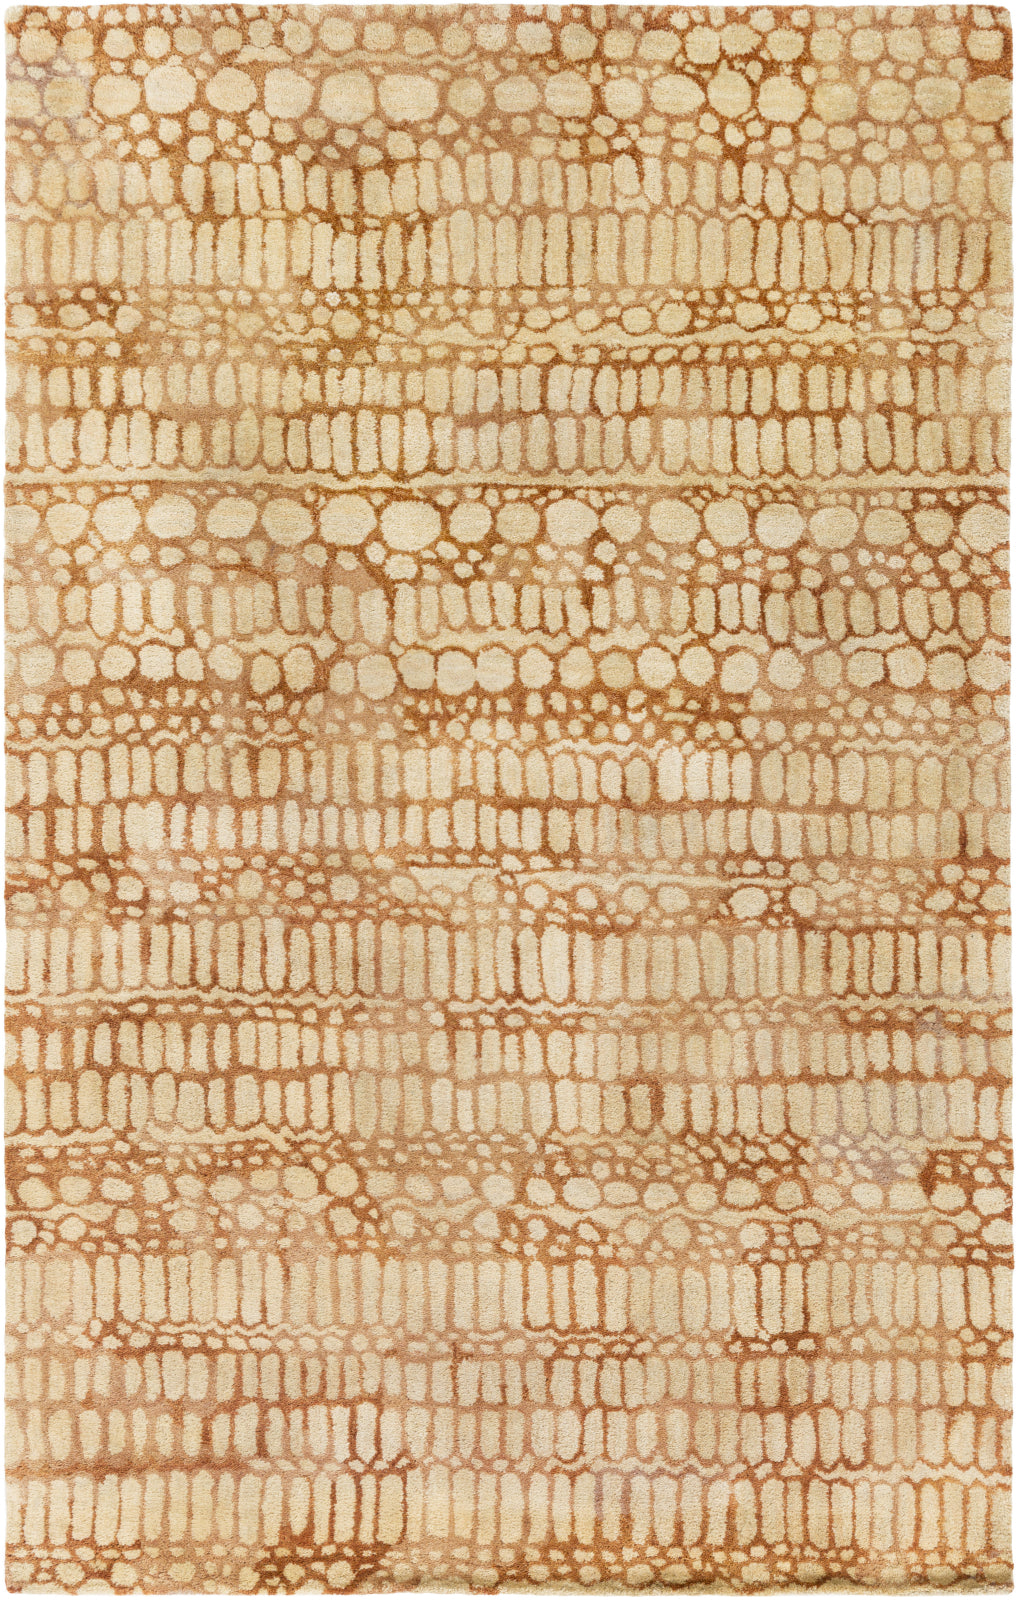 Surya Natural Affinity NTA-1008 Area Rug by Shell Rummel